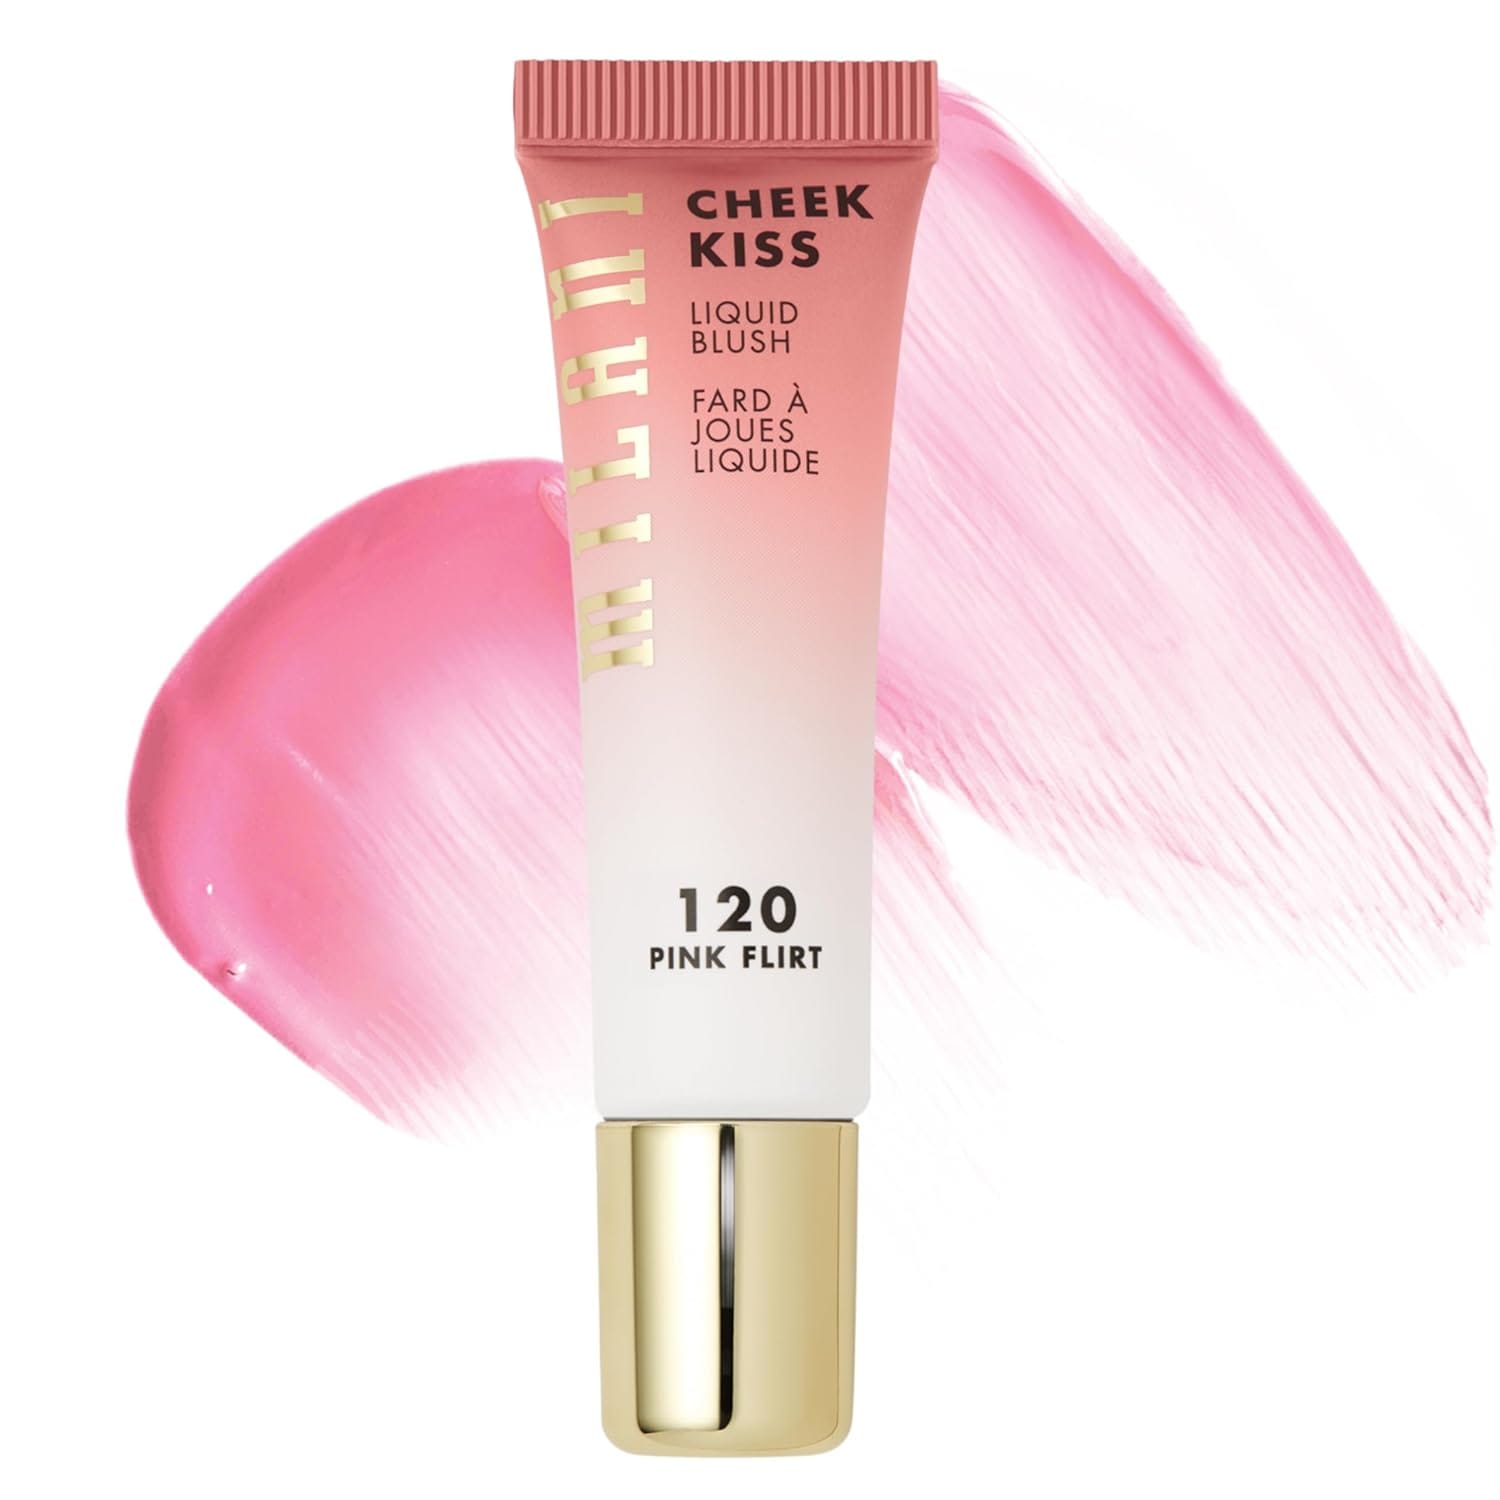 Blushing Beauty: Our Best Profusion Liquid Blush